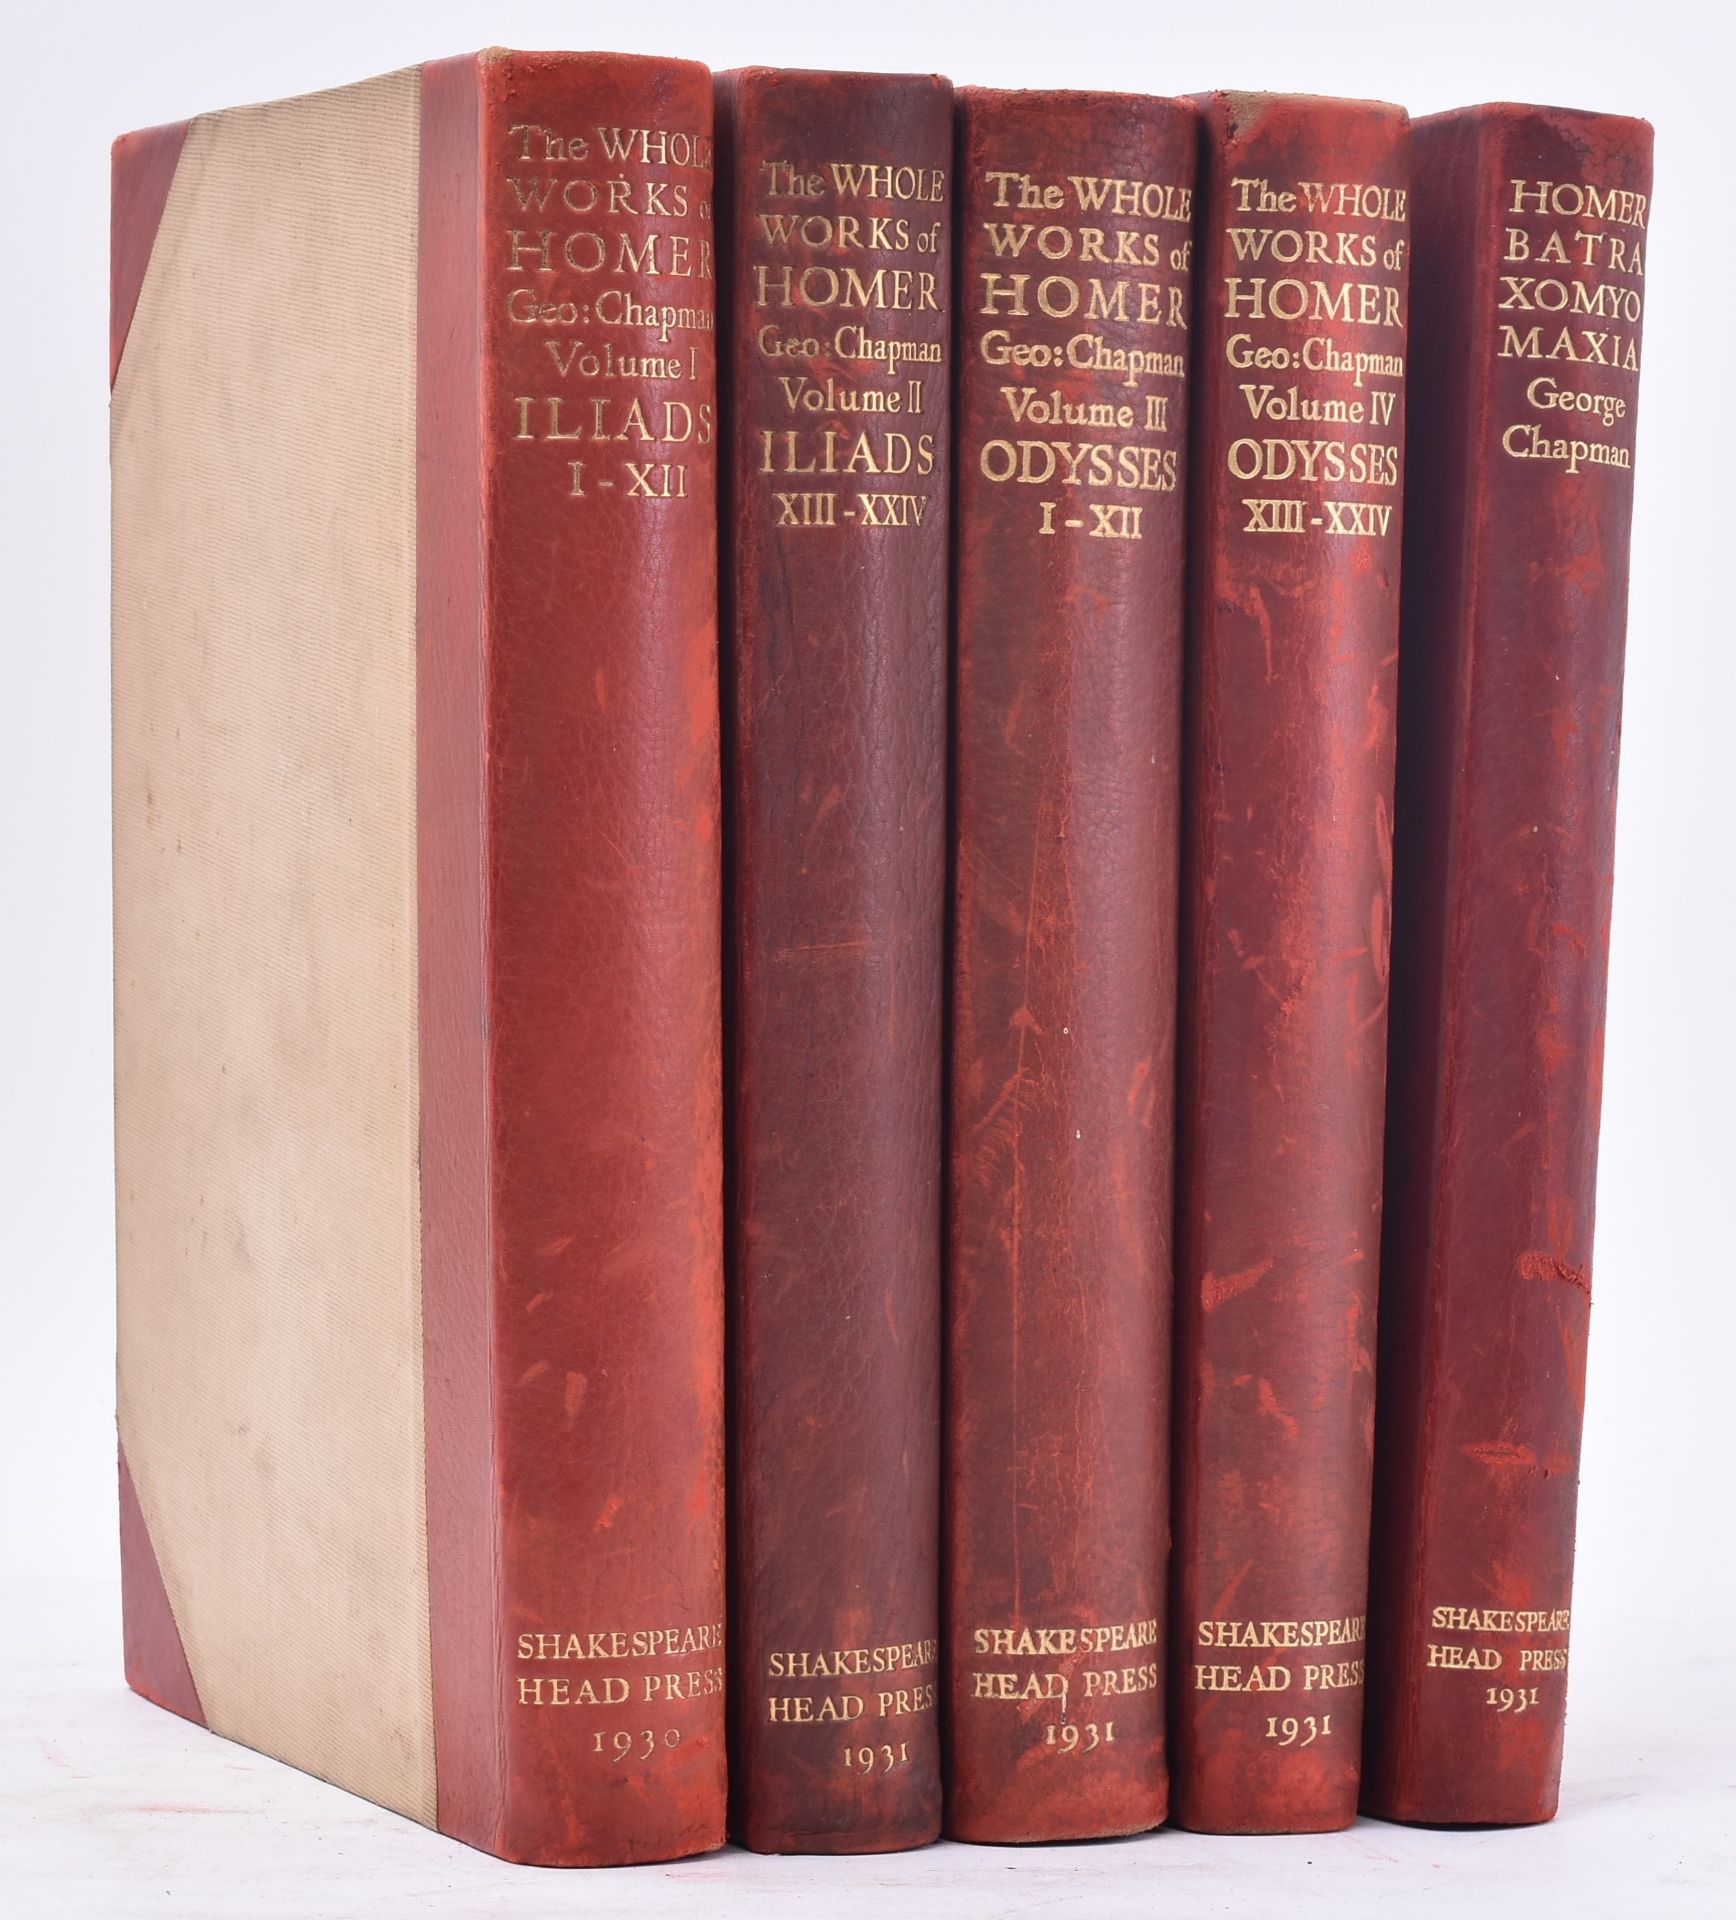 1930 - WORKS OF HOMER IN FIVE VOLUMES - SHAKESPEARE HEAD - Image 2 of 8